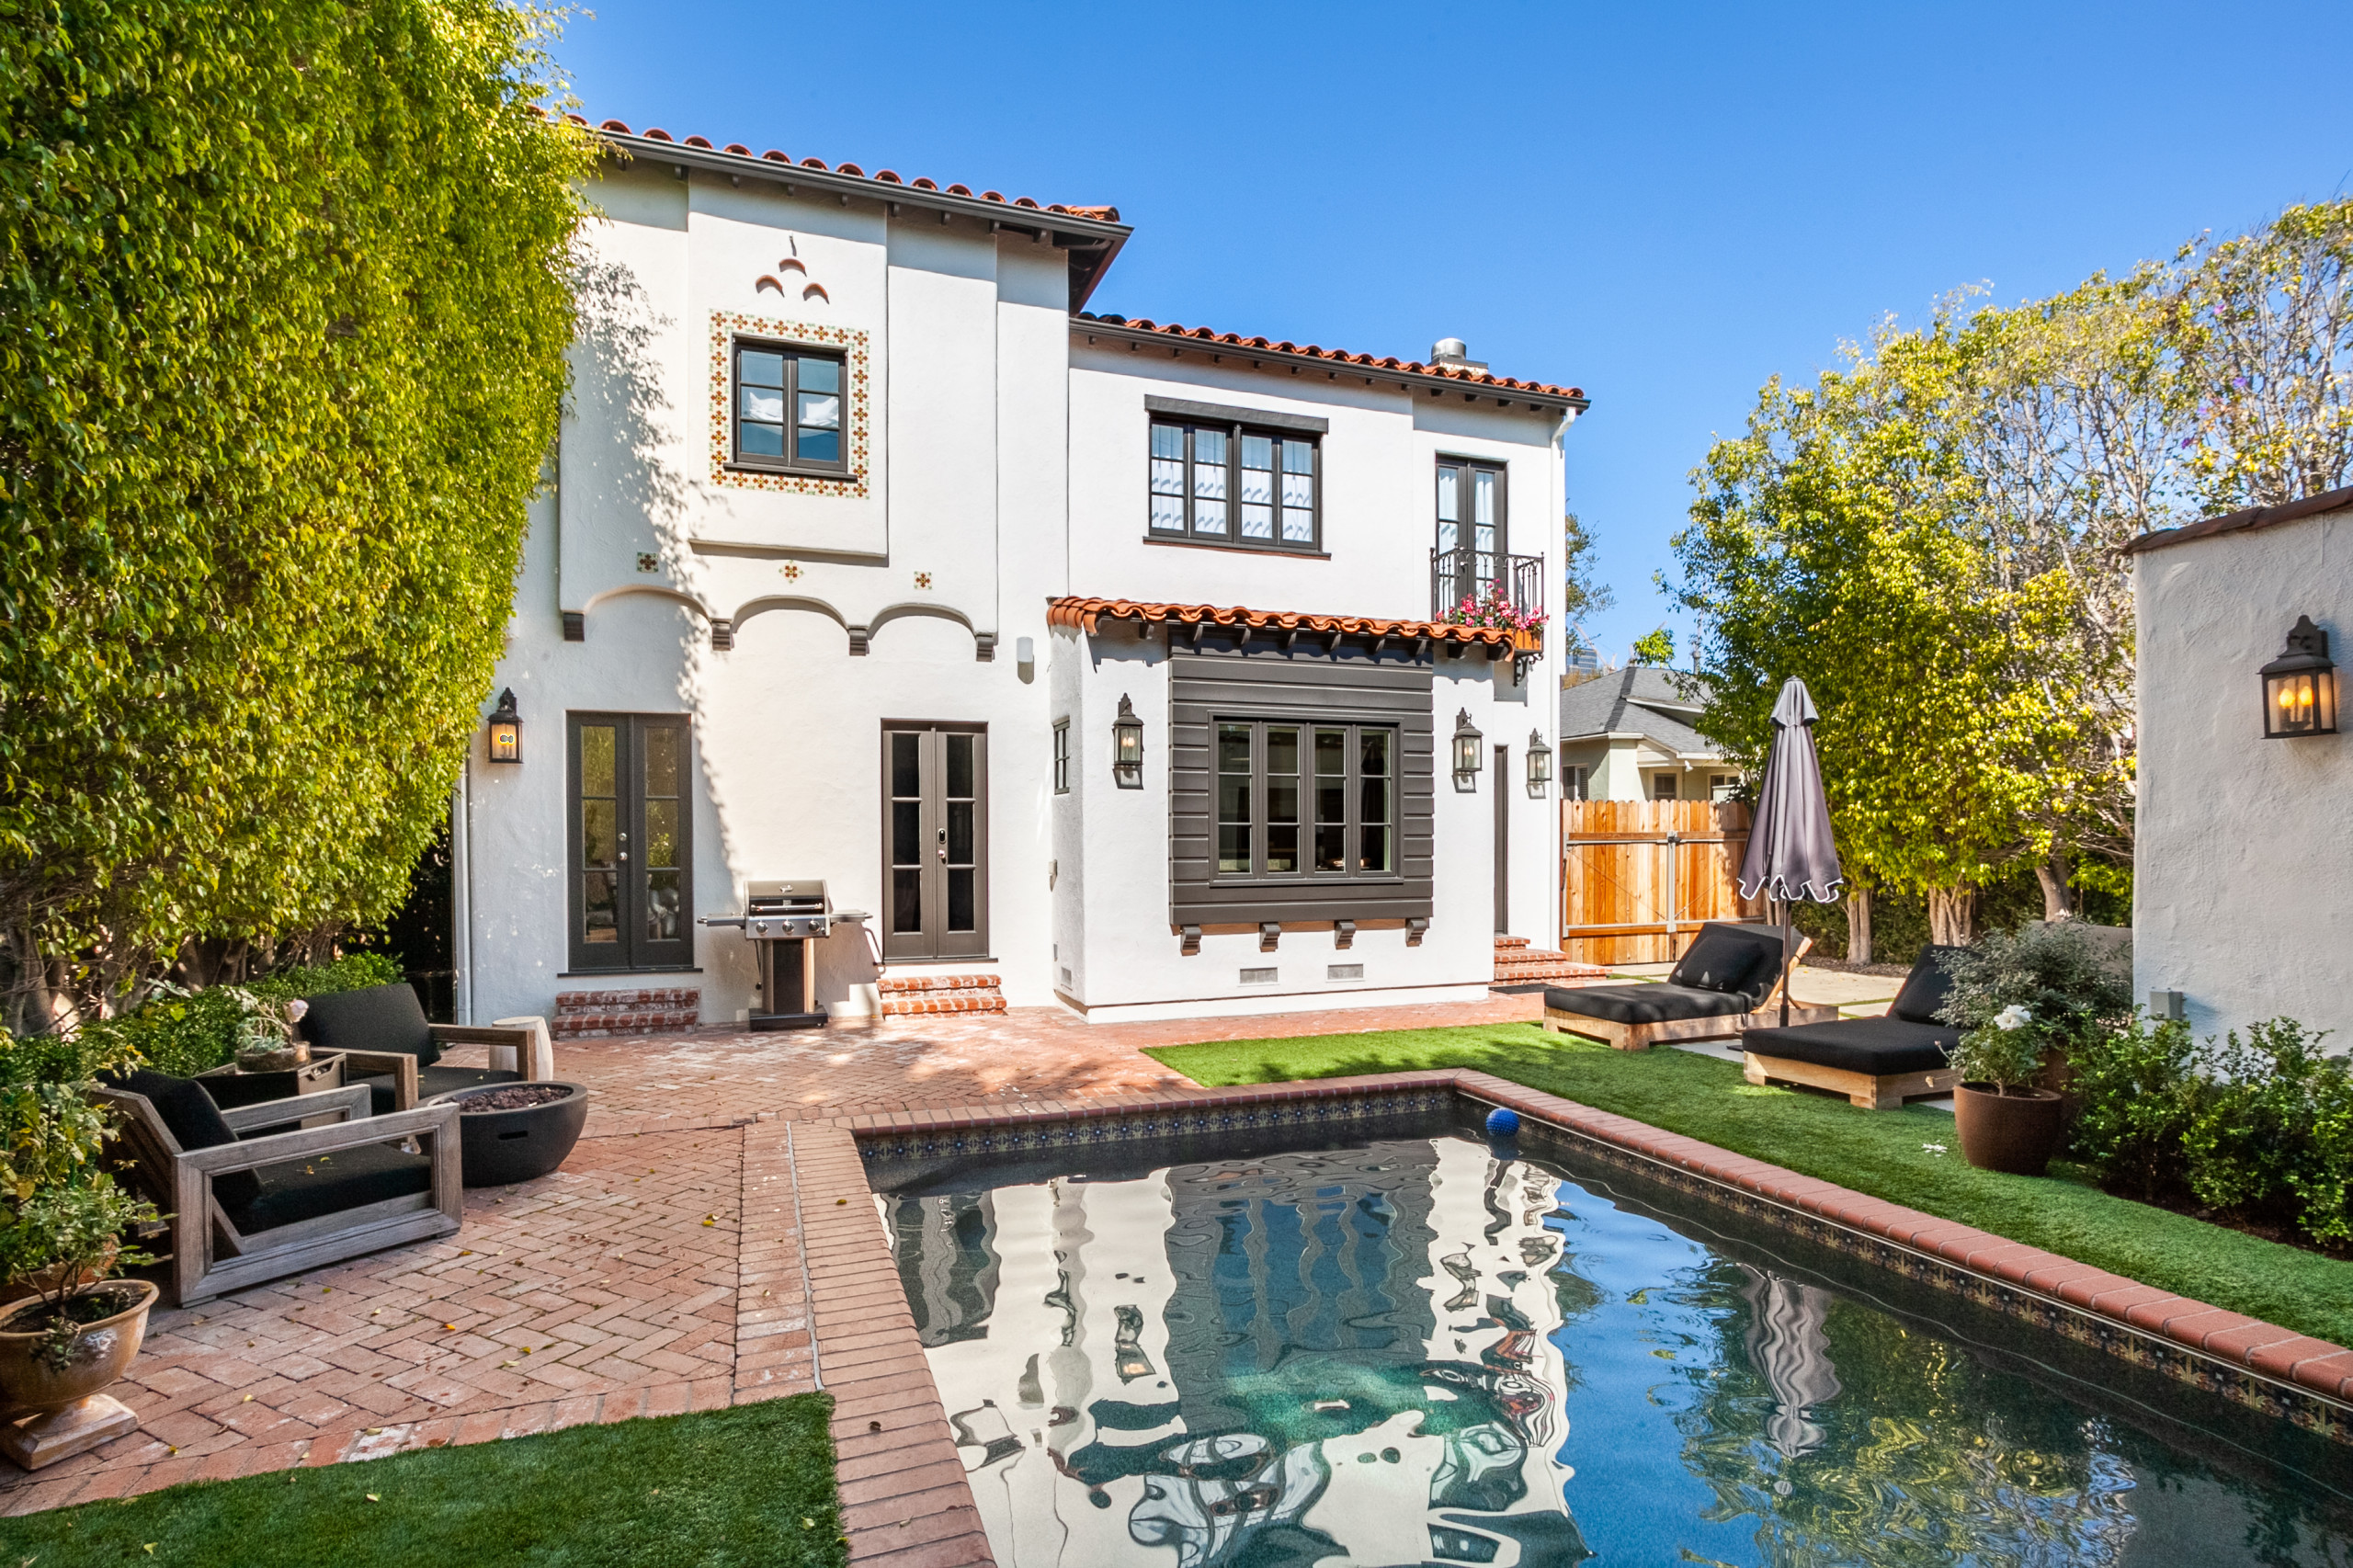 Transitional Spanish Colonial Addition and Remodel